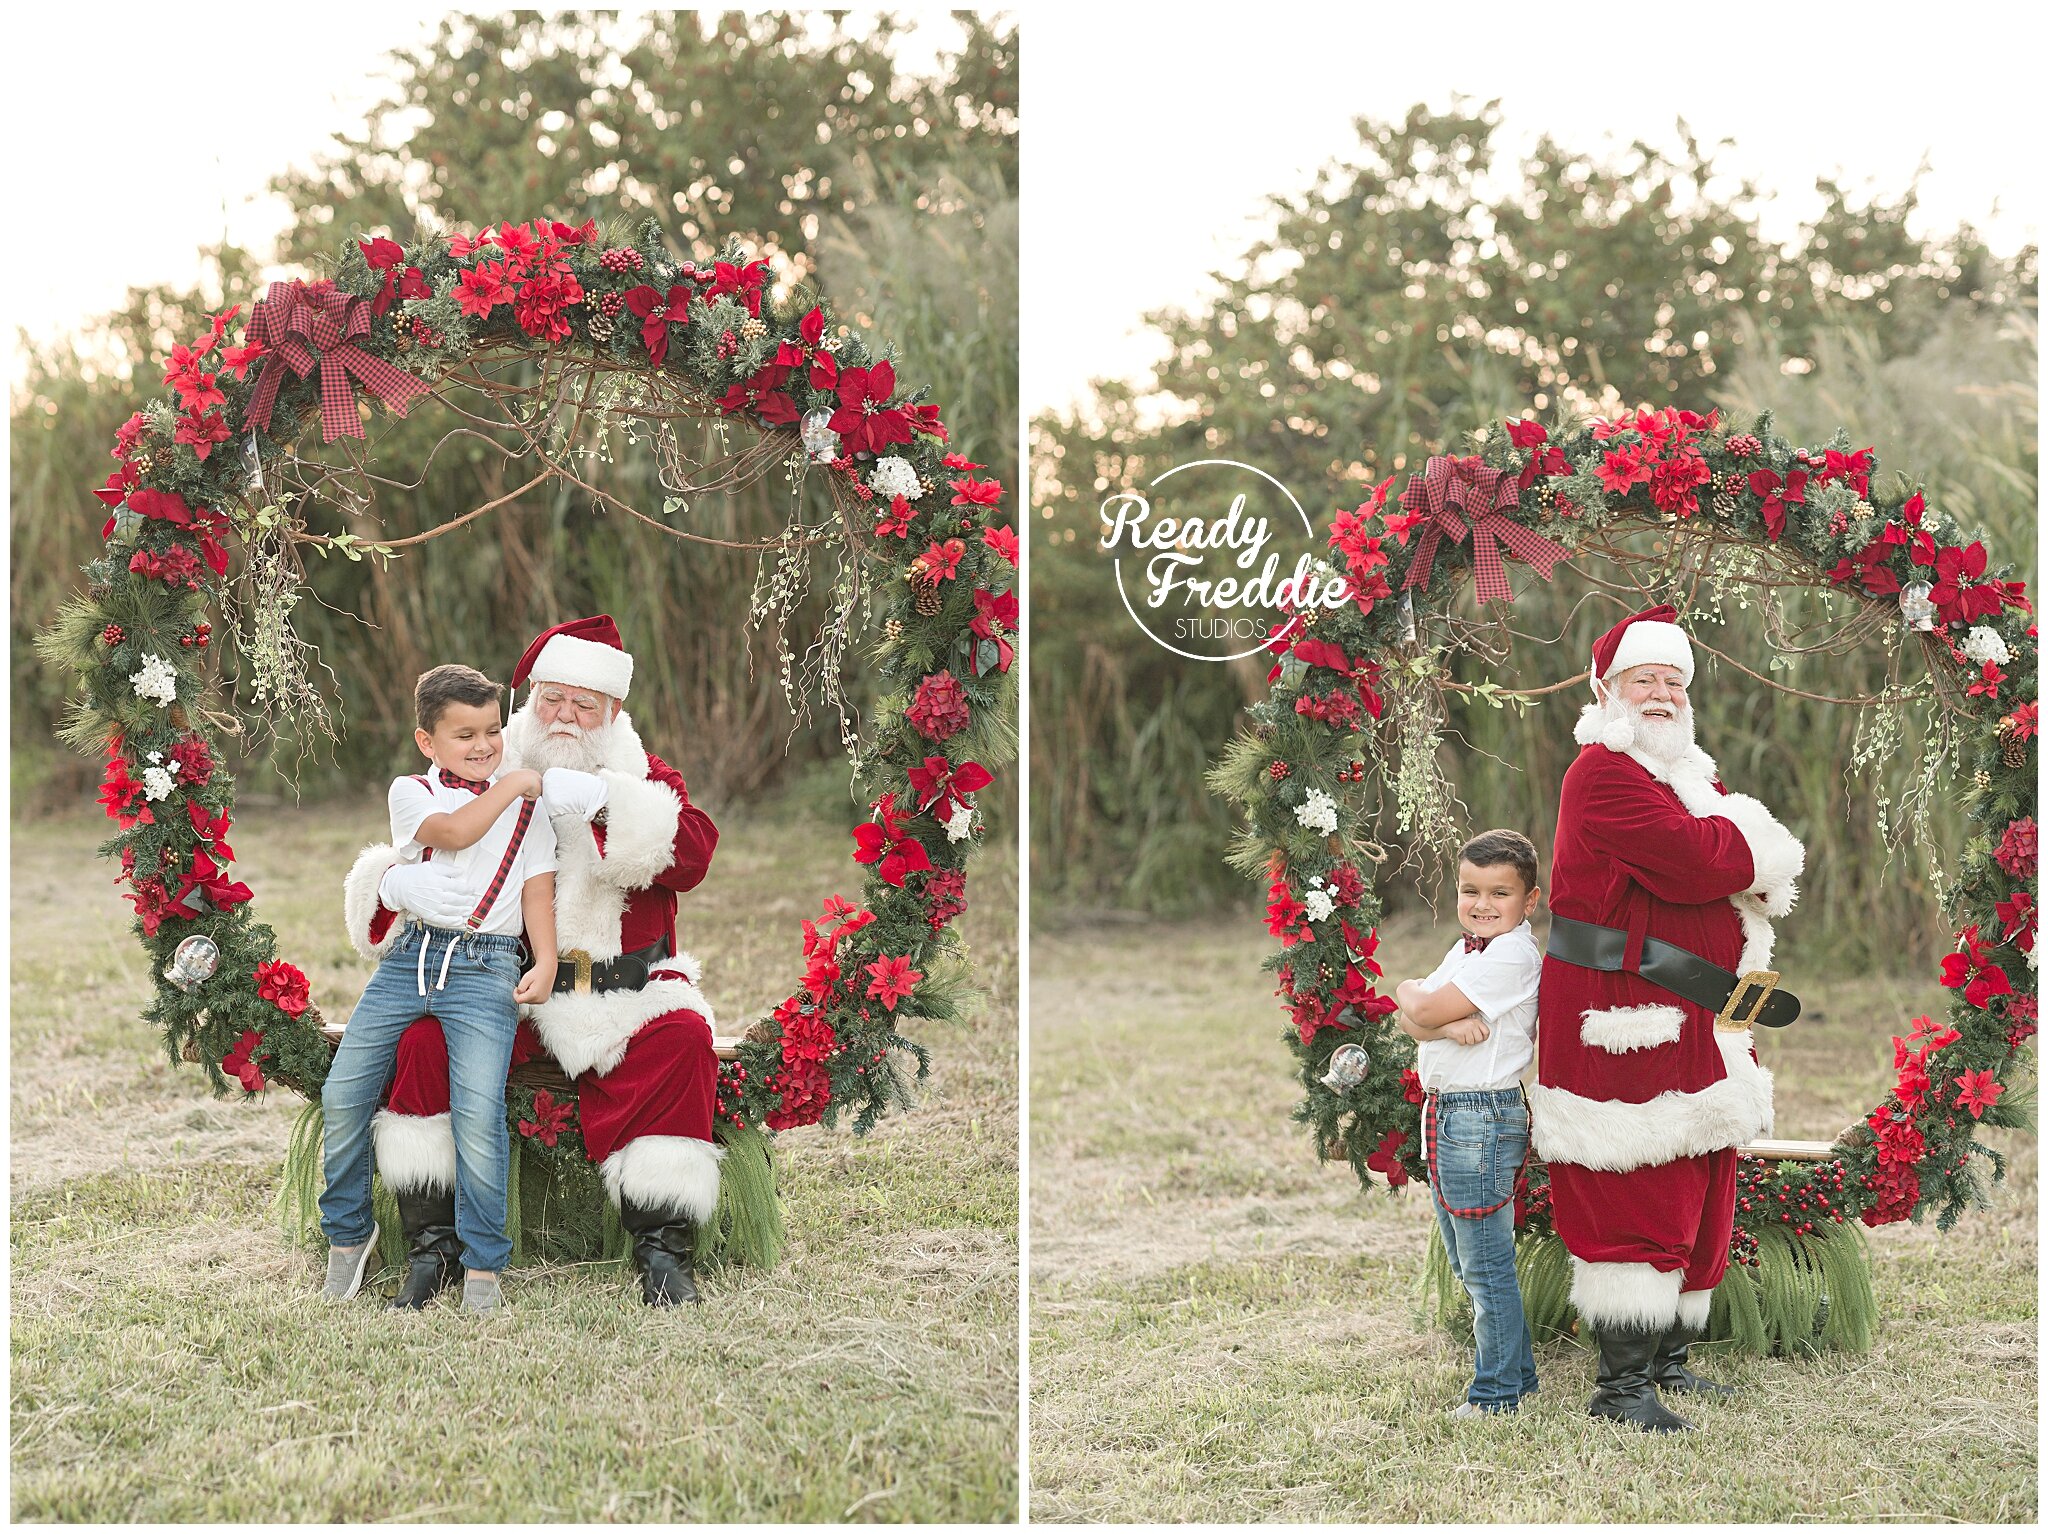 Cool older boy with Santa and outdoor giant wreath with Ivanna Vidal Photography